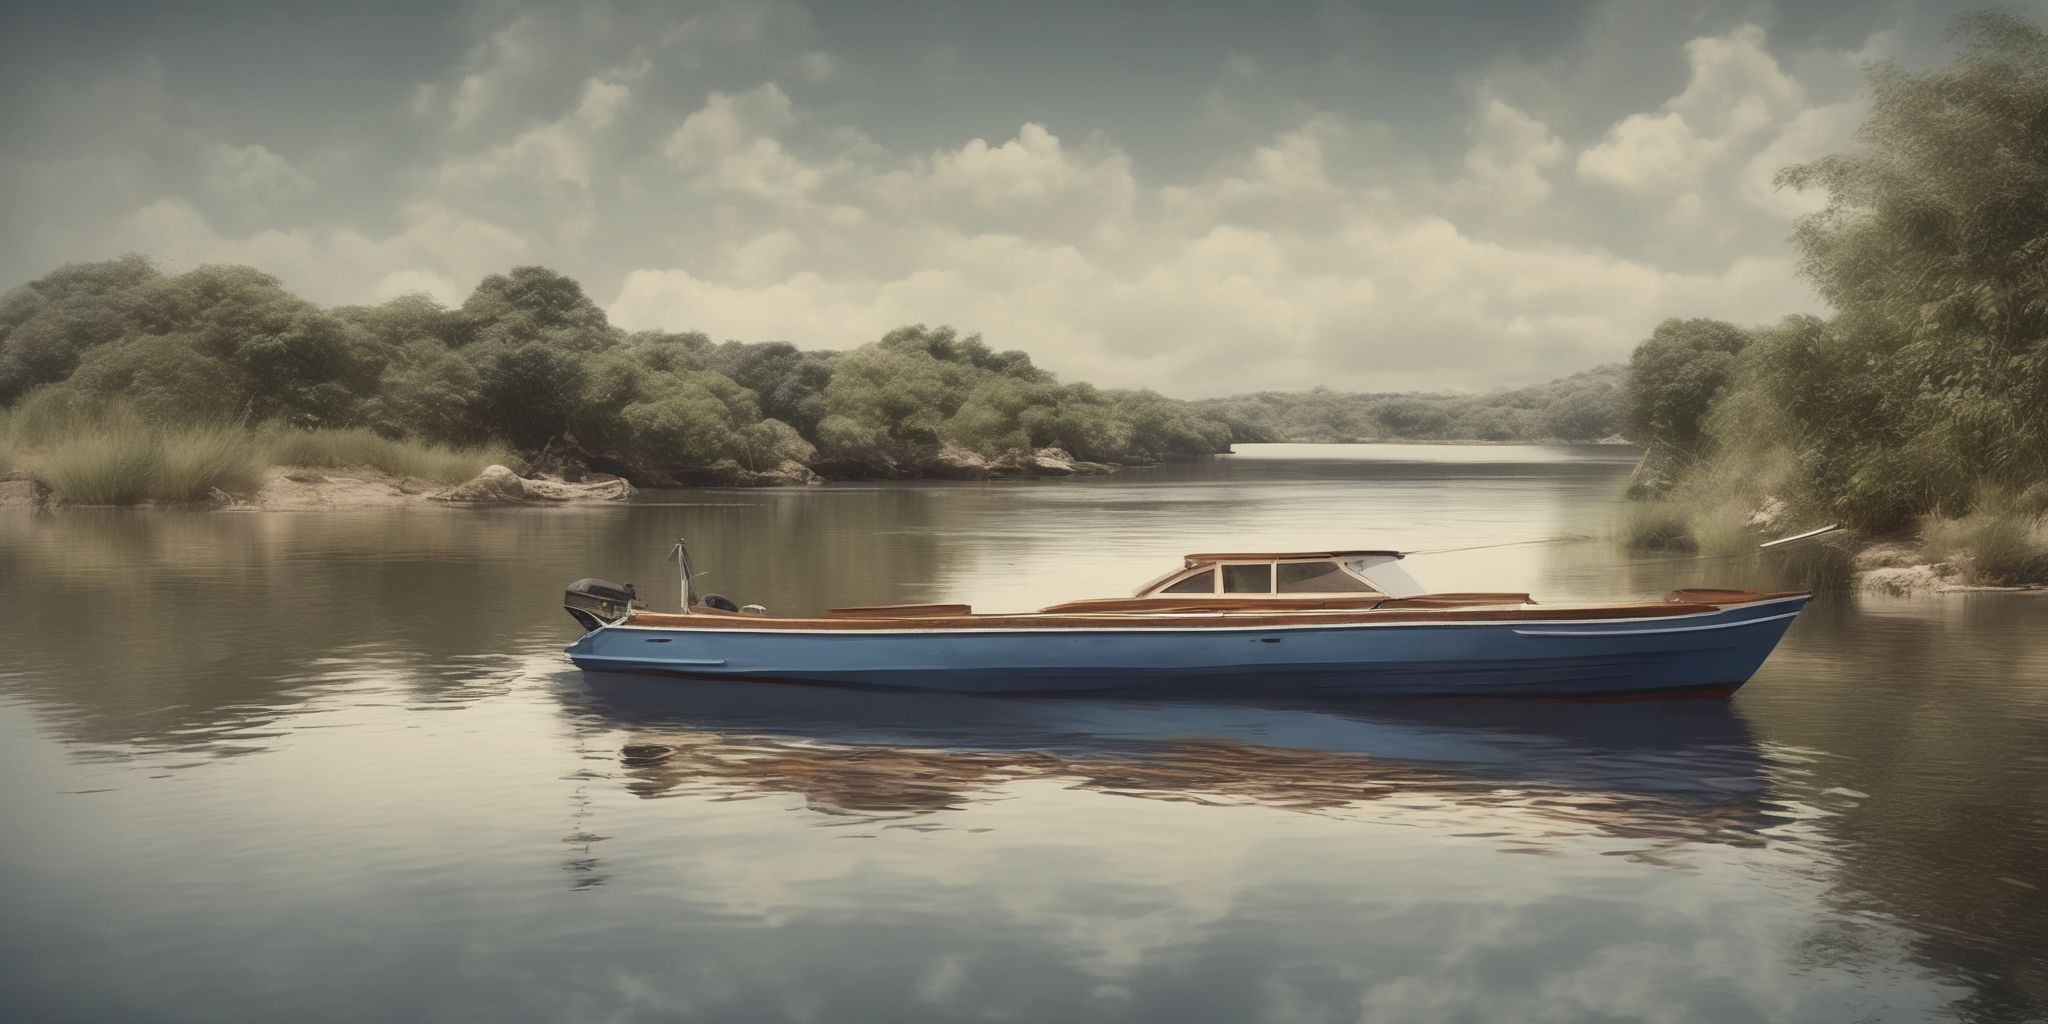 Boat  in realistic, photographic style